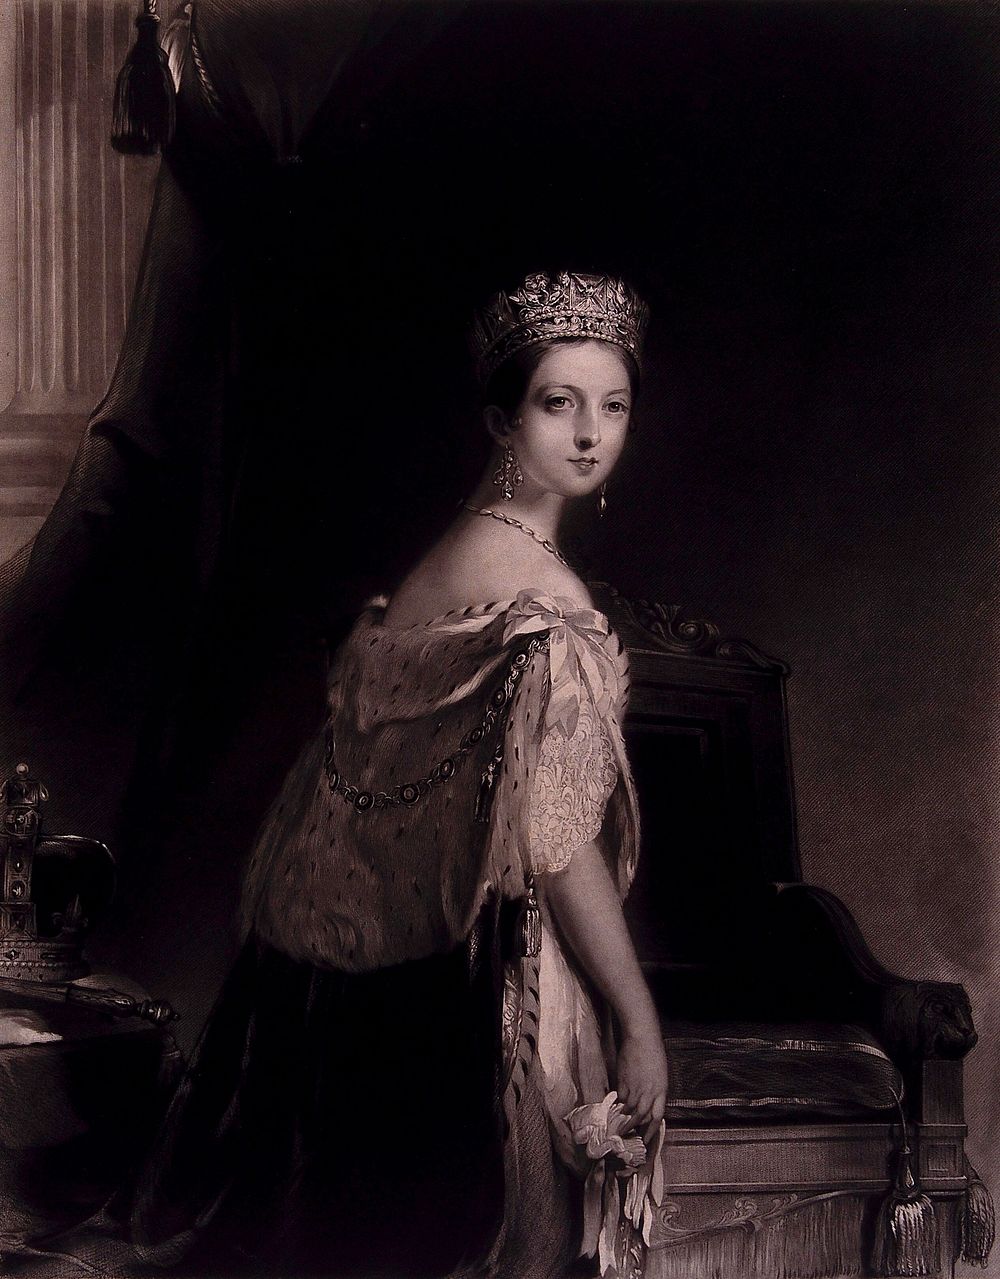 Queen Victoria wearing a tiara, standing next to her throne. Mezzotint by C.E. Wagstaff after T. Sully, 1839.